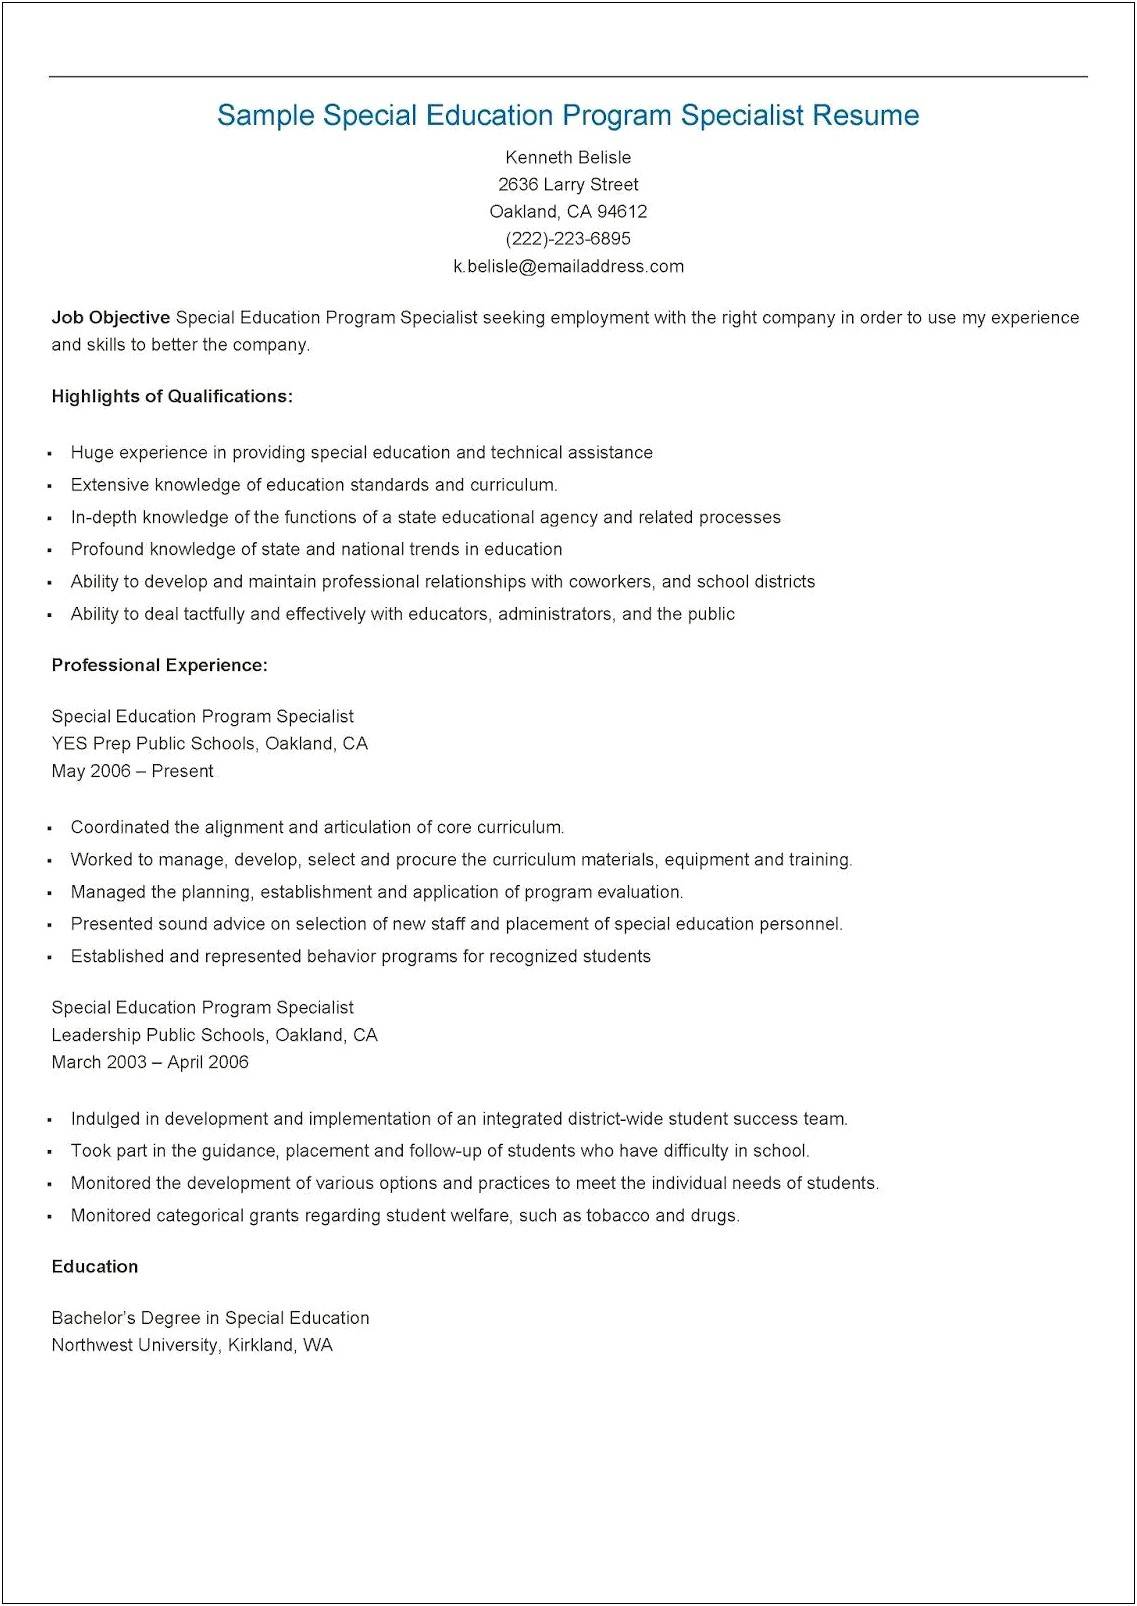 Sample Resume For Application Specialist